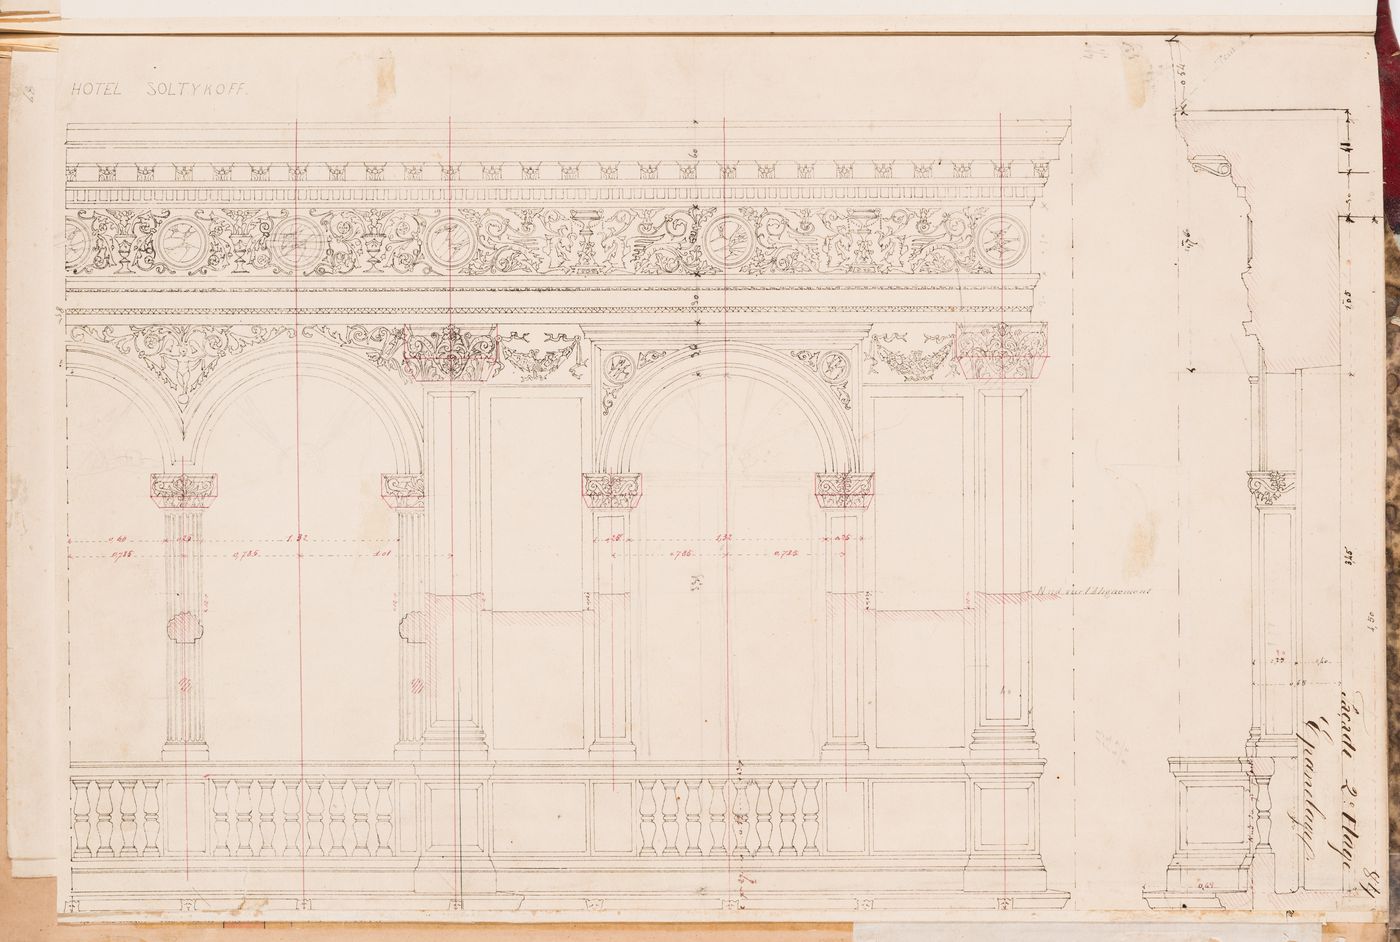 Partial elevation and wall section for the principal façade indicating the form of the rough cut stone, Hôtel Soltykoff